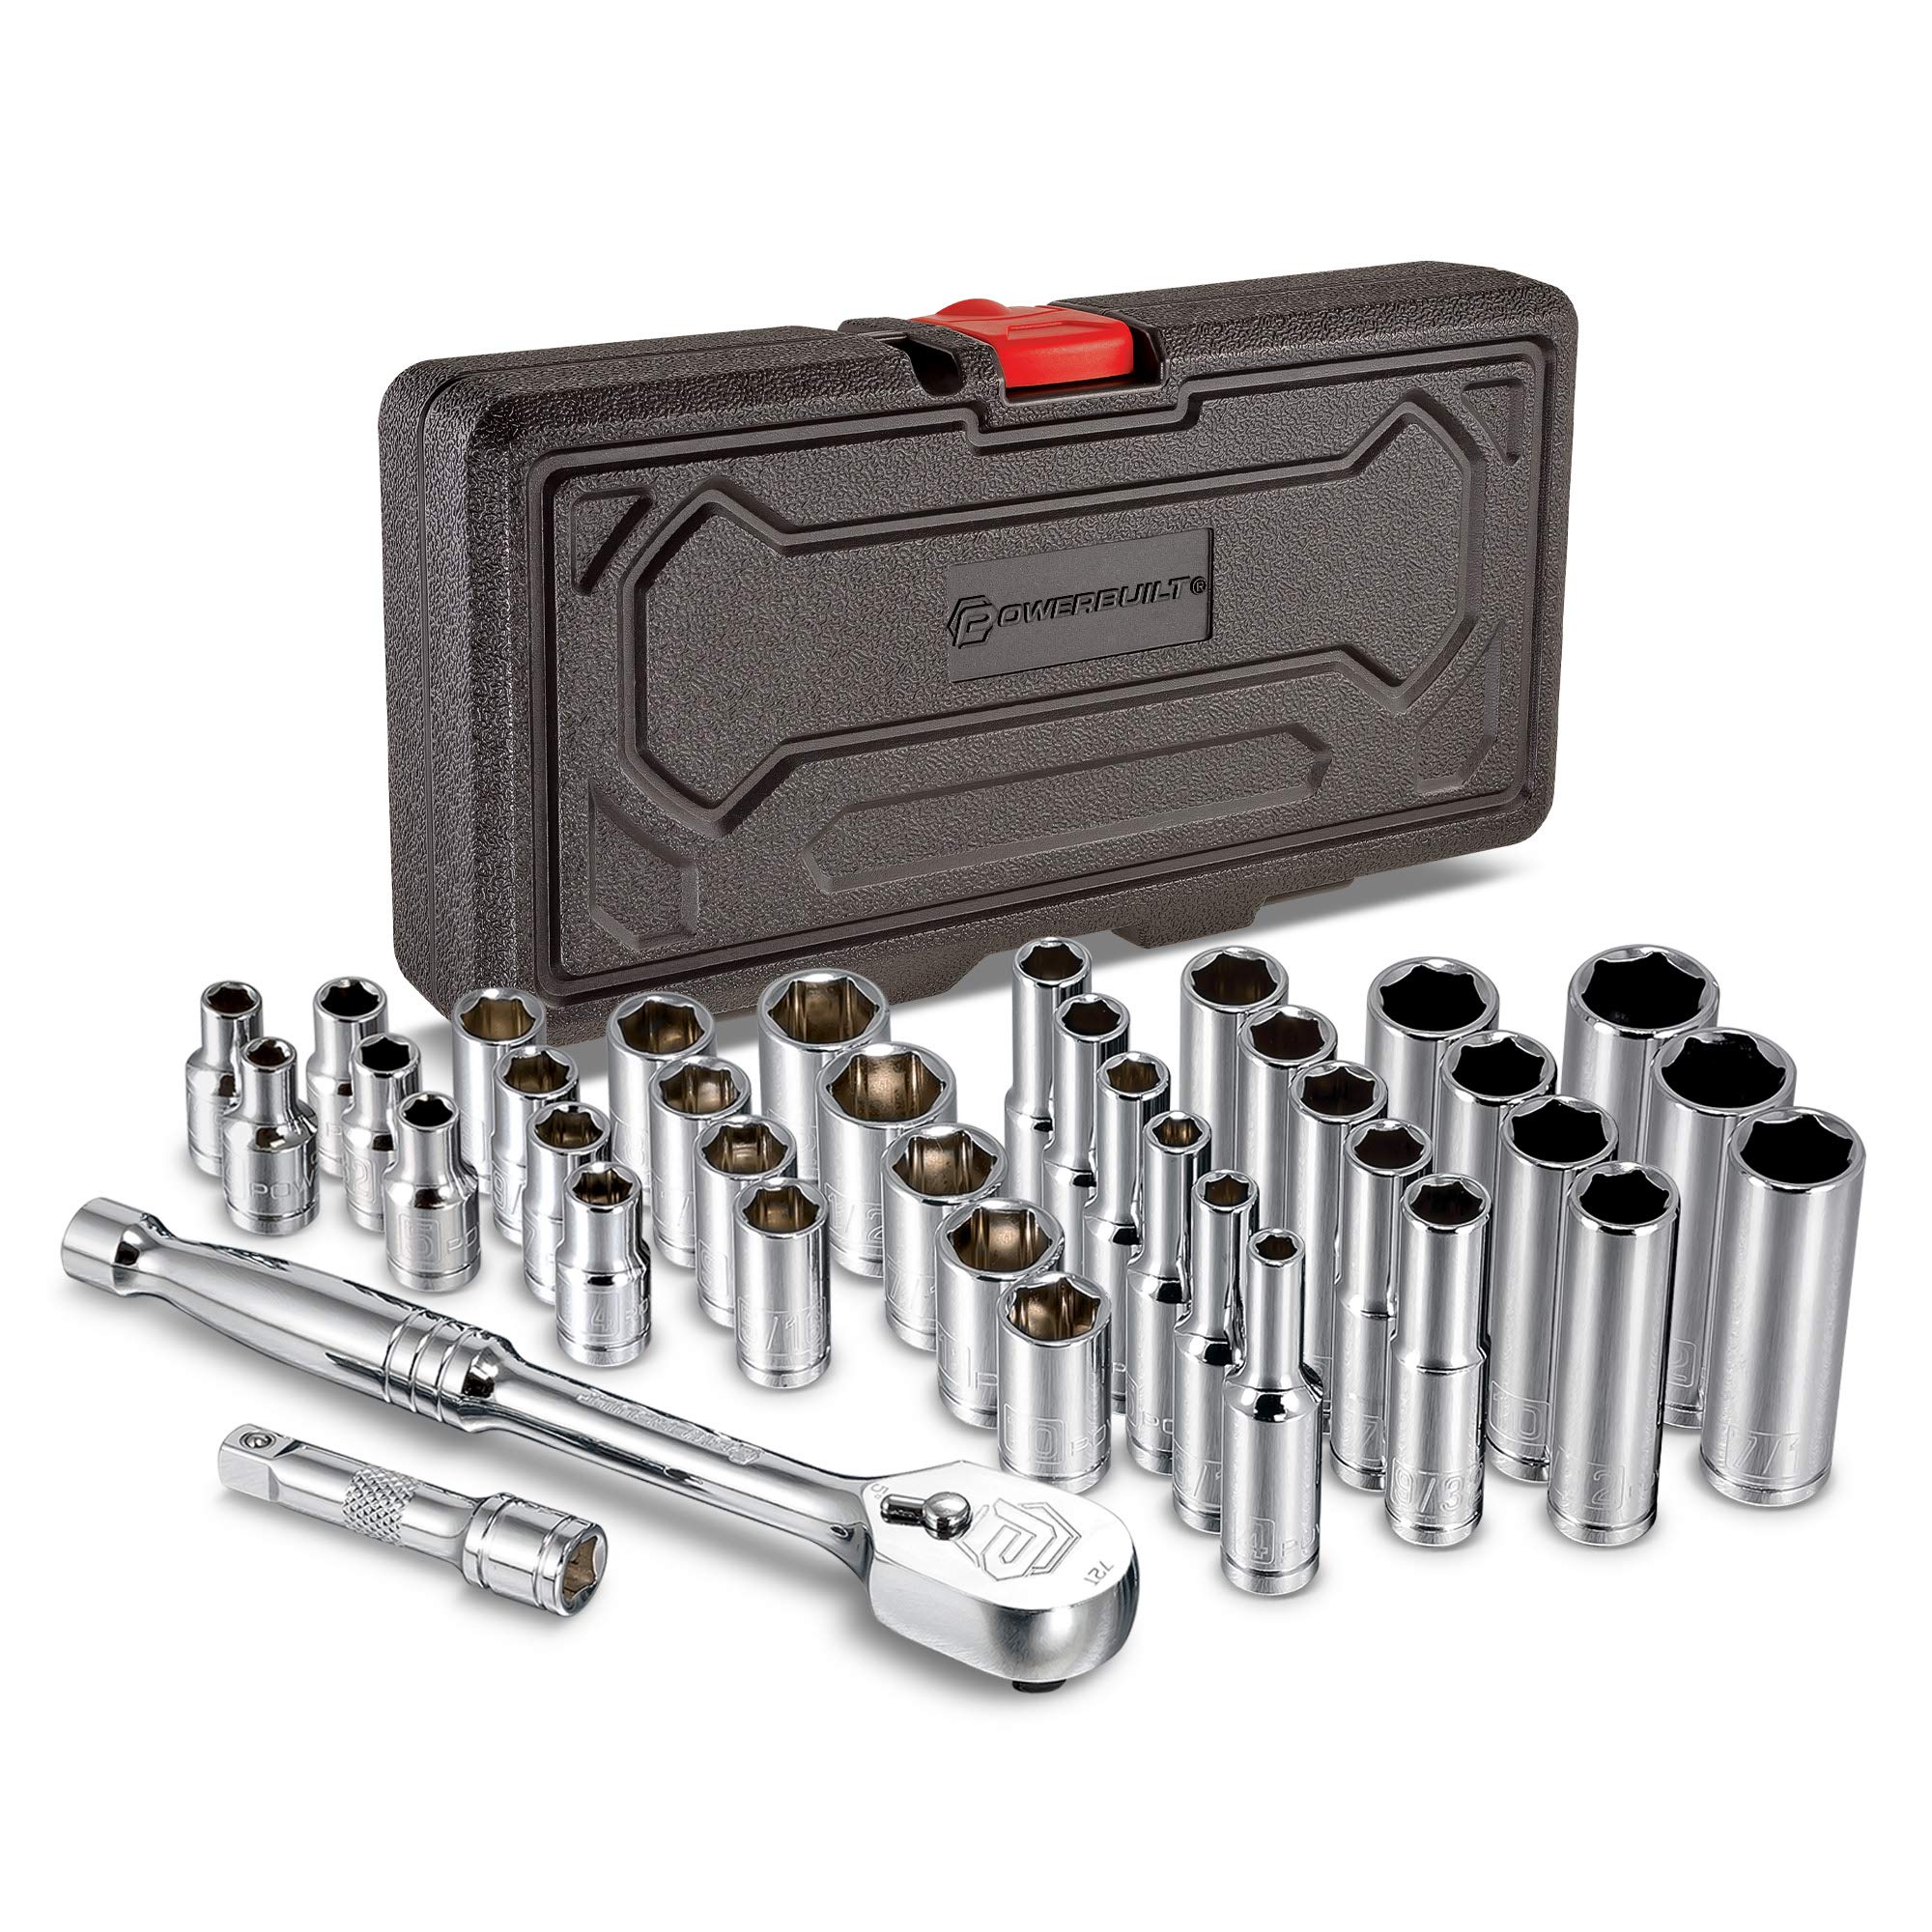 Powerbuilt 642450 38 Piece 1/4-inch Drive Mechanics Tool Set - with SAE and Metric Socket Set, 72 Tooth Seal-Head Ratchet, Automotive Tool Kit, including Case $22.09 + FS w/ Prime